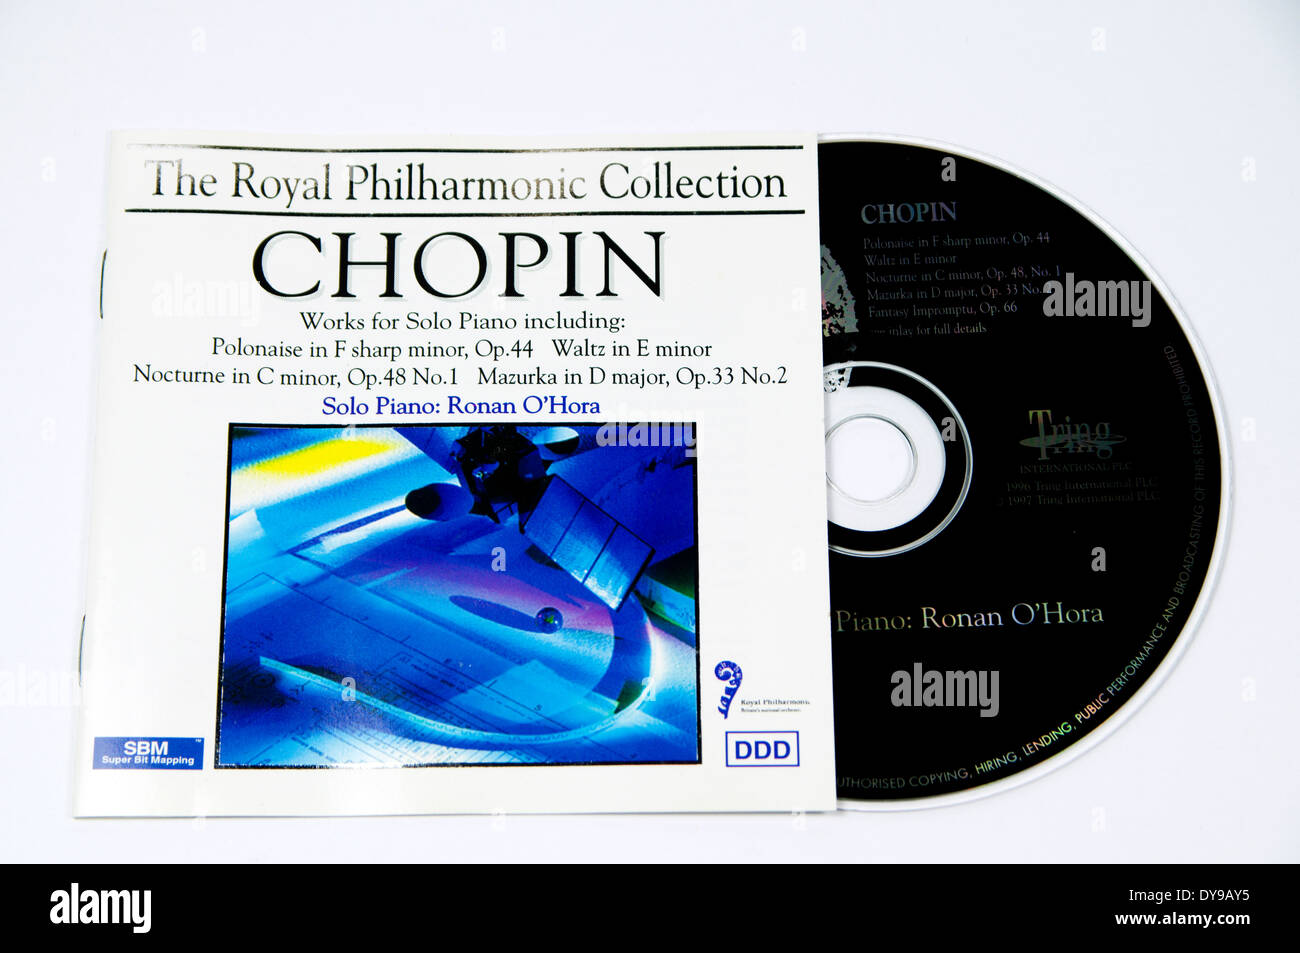 Copin music cd by the Royal Philharmonic Orchestra Stock Photo